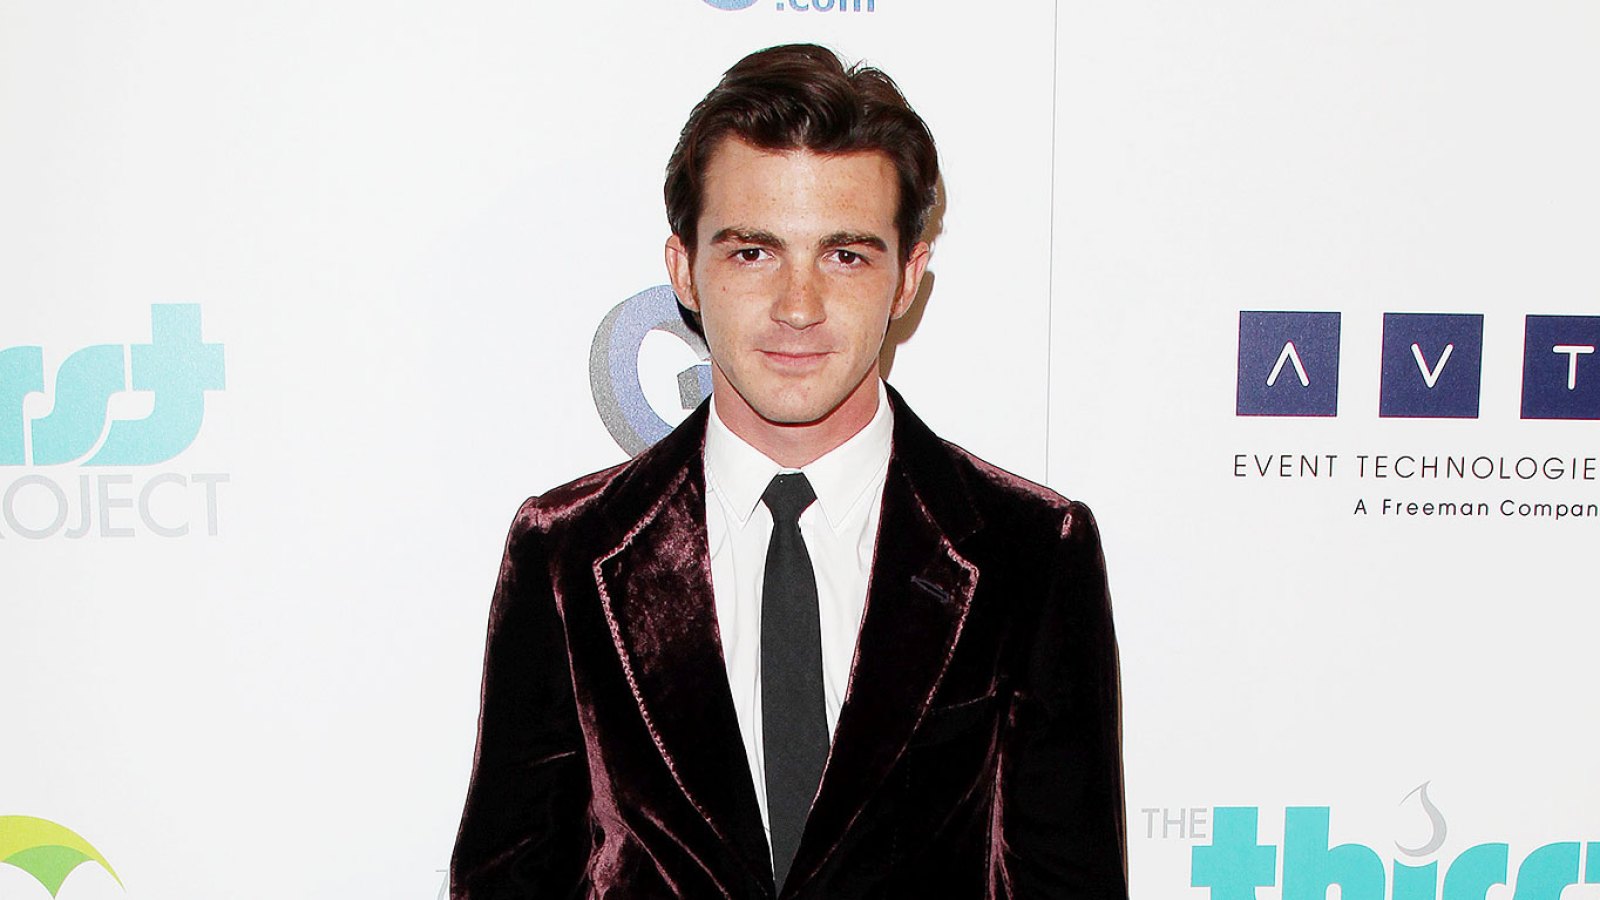 Nickelodeon Star Drake Bell Arrested on Suspicion of DUI: Details